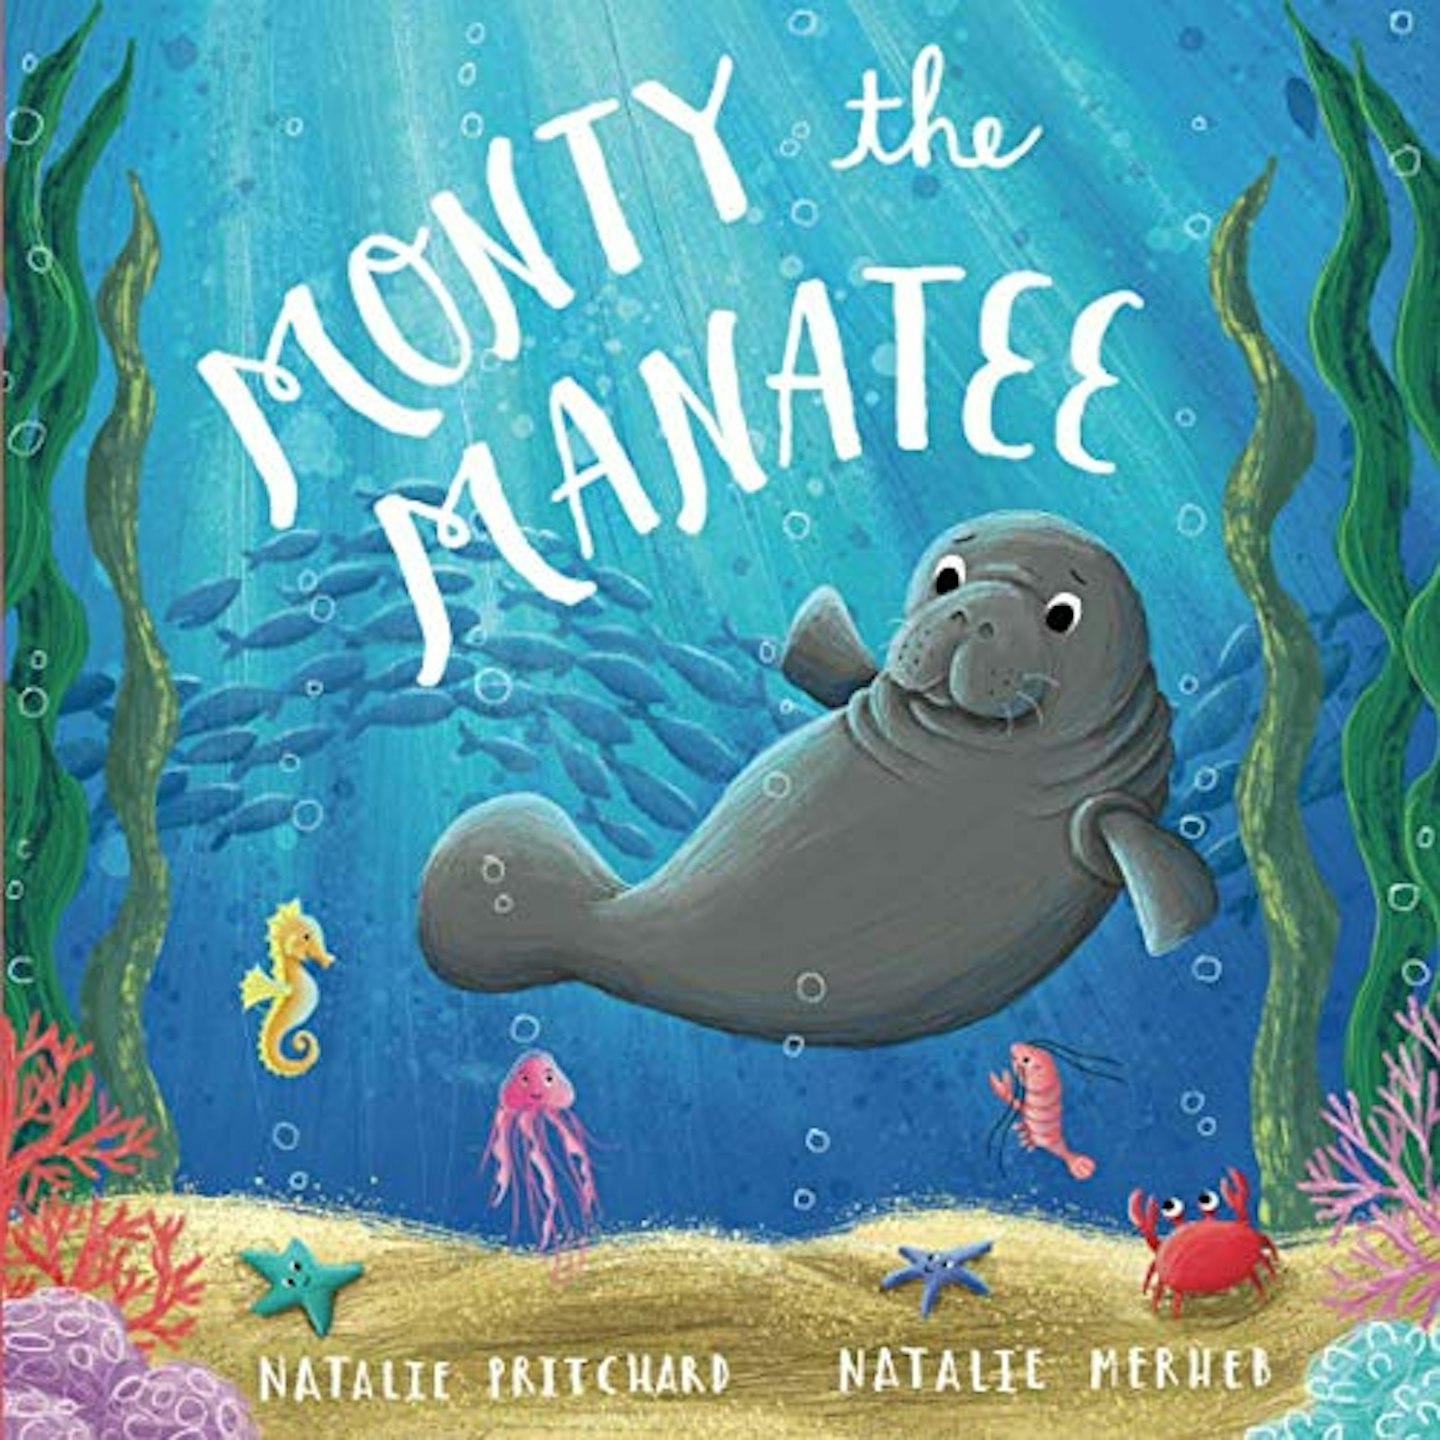 Monty the Manatee - books for four year olds